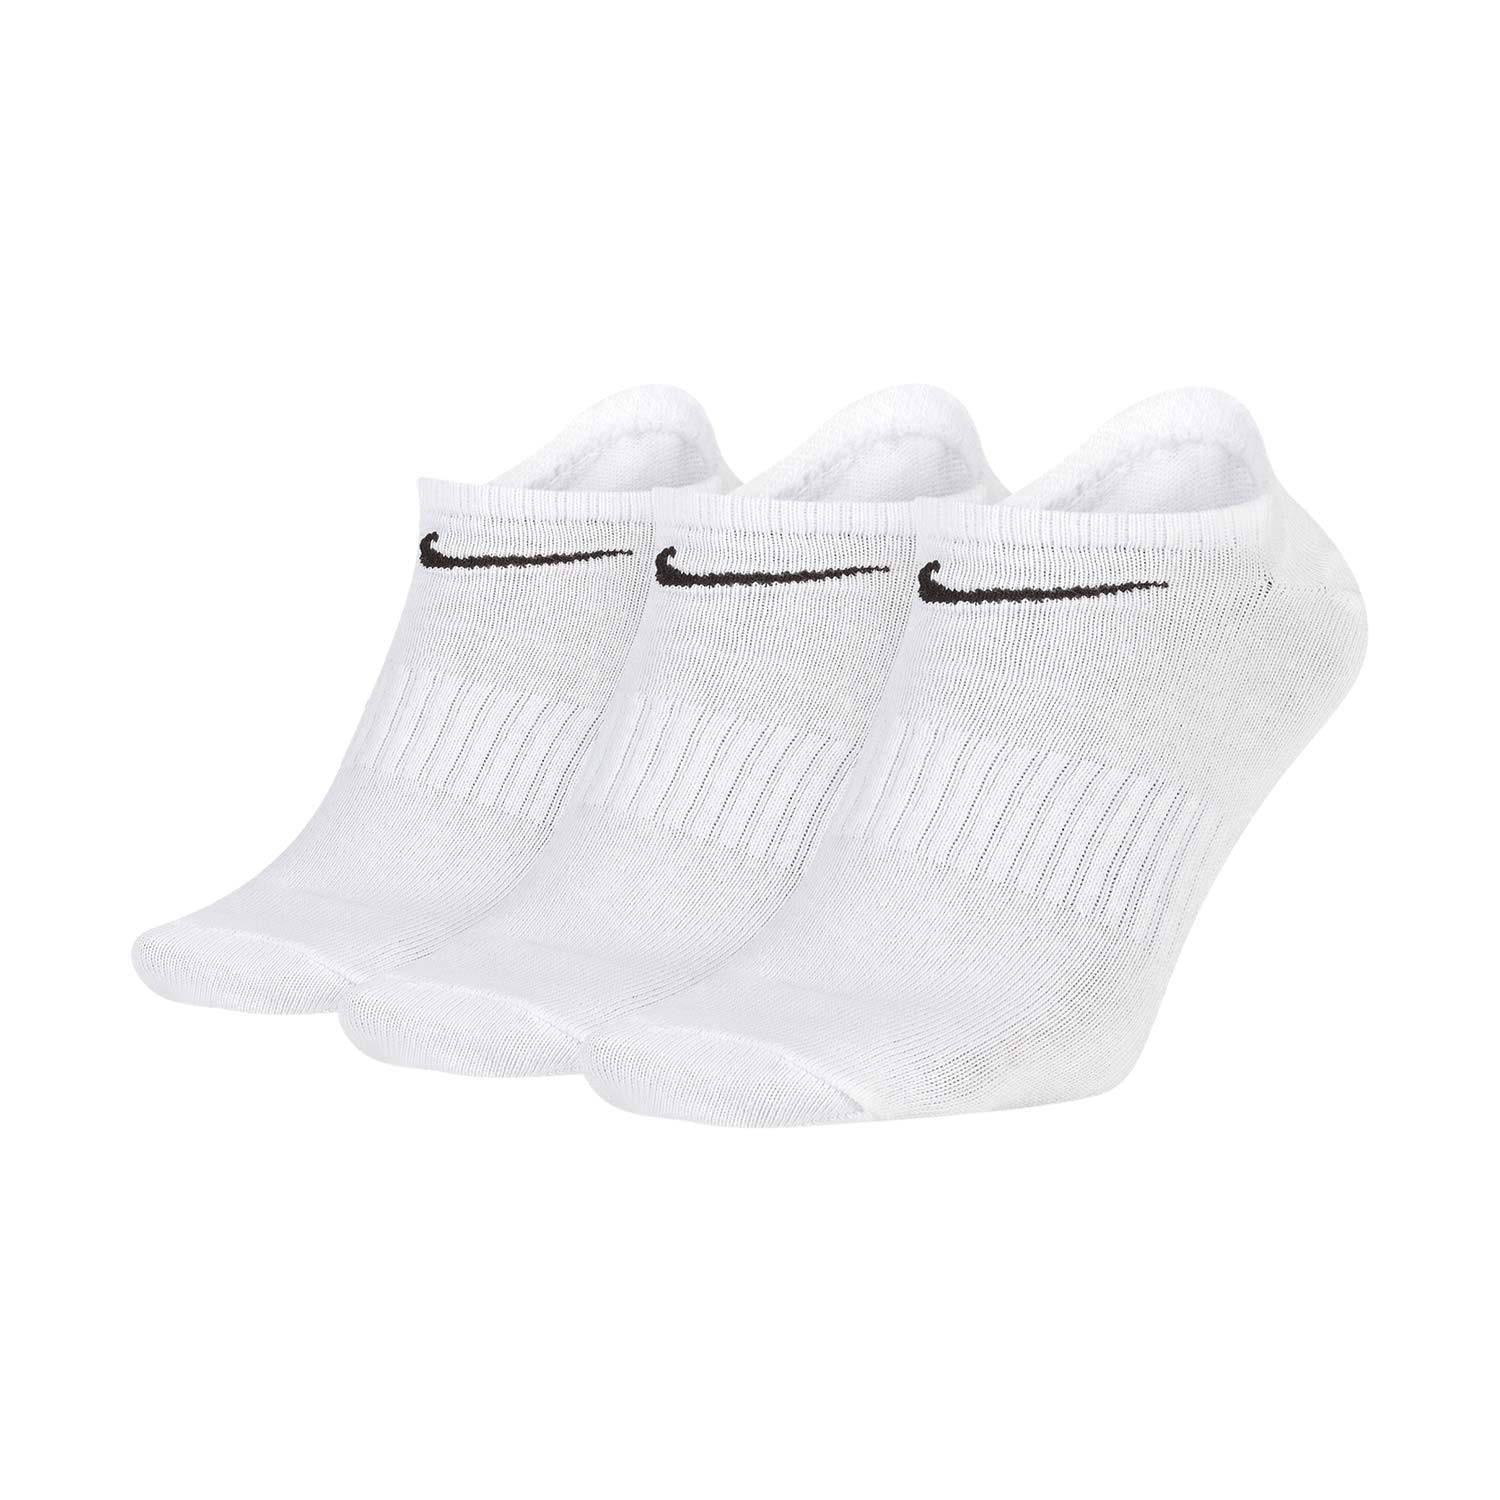 Calcetines Nike invisibles finos Pack 3 uds Everyday